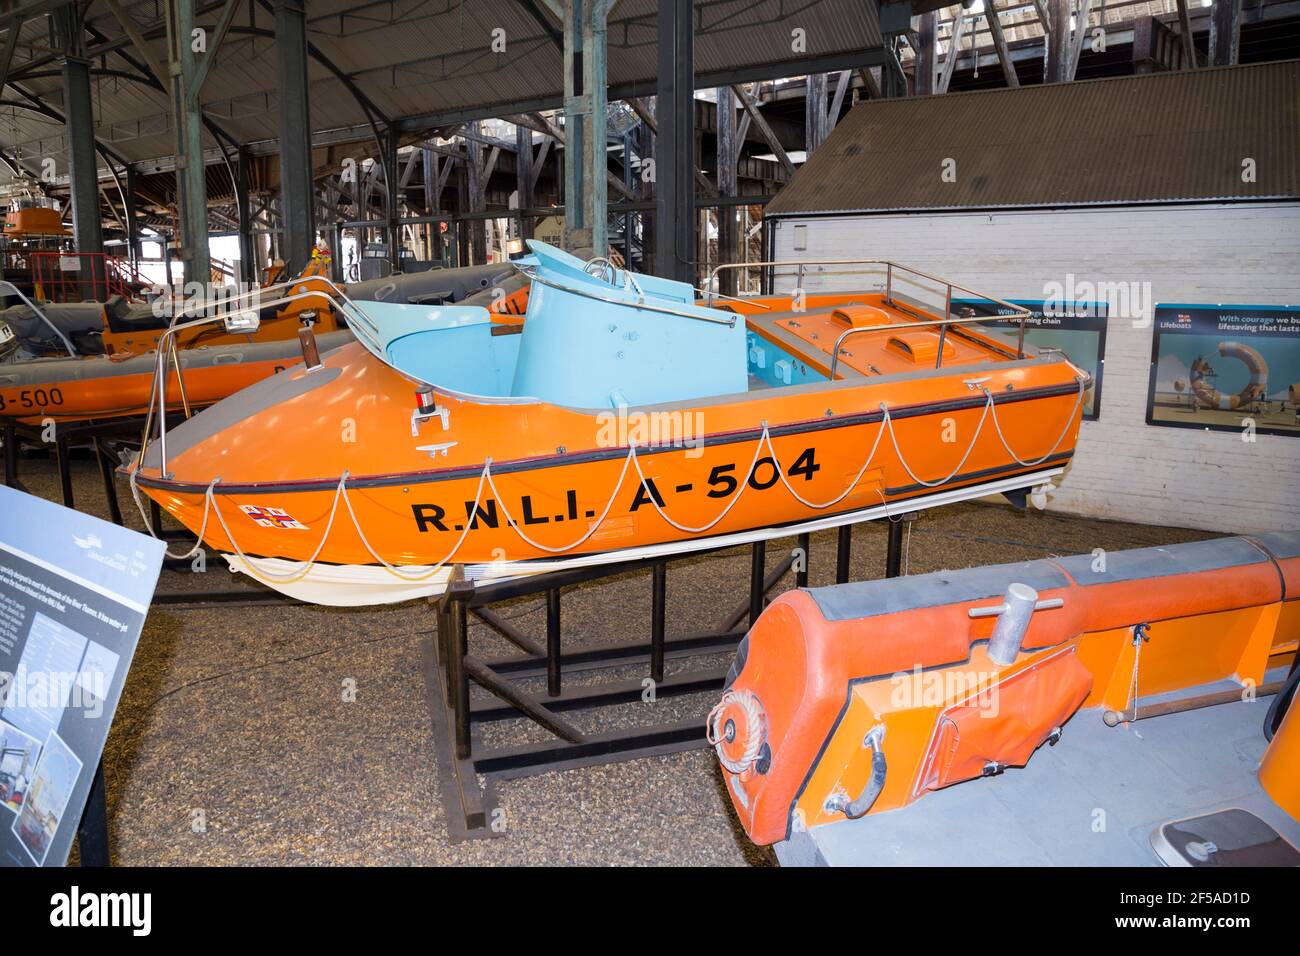 The A-504 MacLachlan class modern vintage historic RNLI Lifeboat on display at Number Four Boat House / Boathouse Number 4 at Historic Dockyard / Dockyards Chatham in Kent. UK (121) Stock Photo